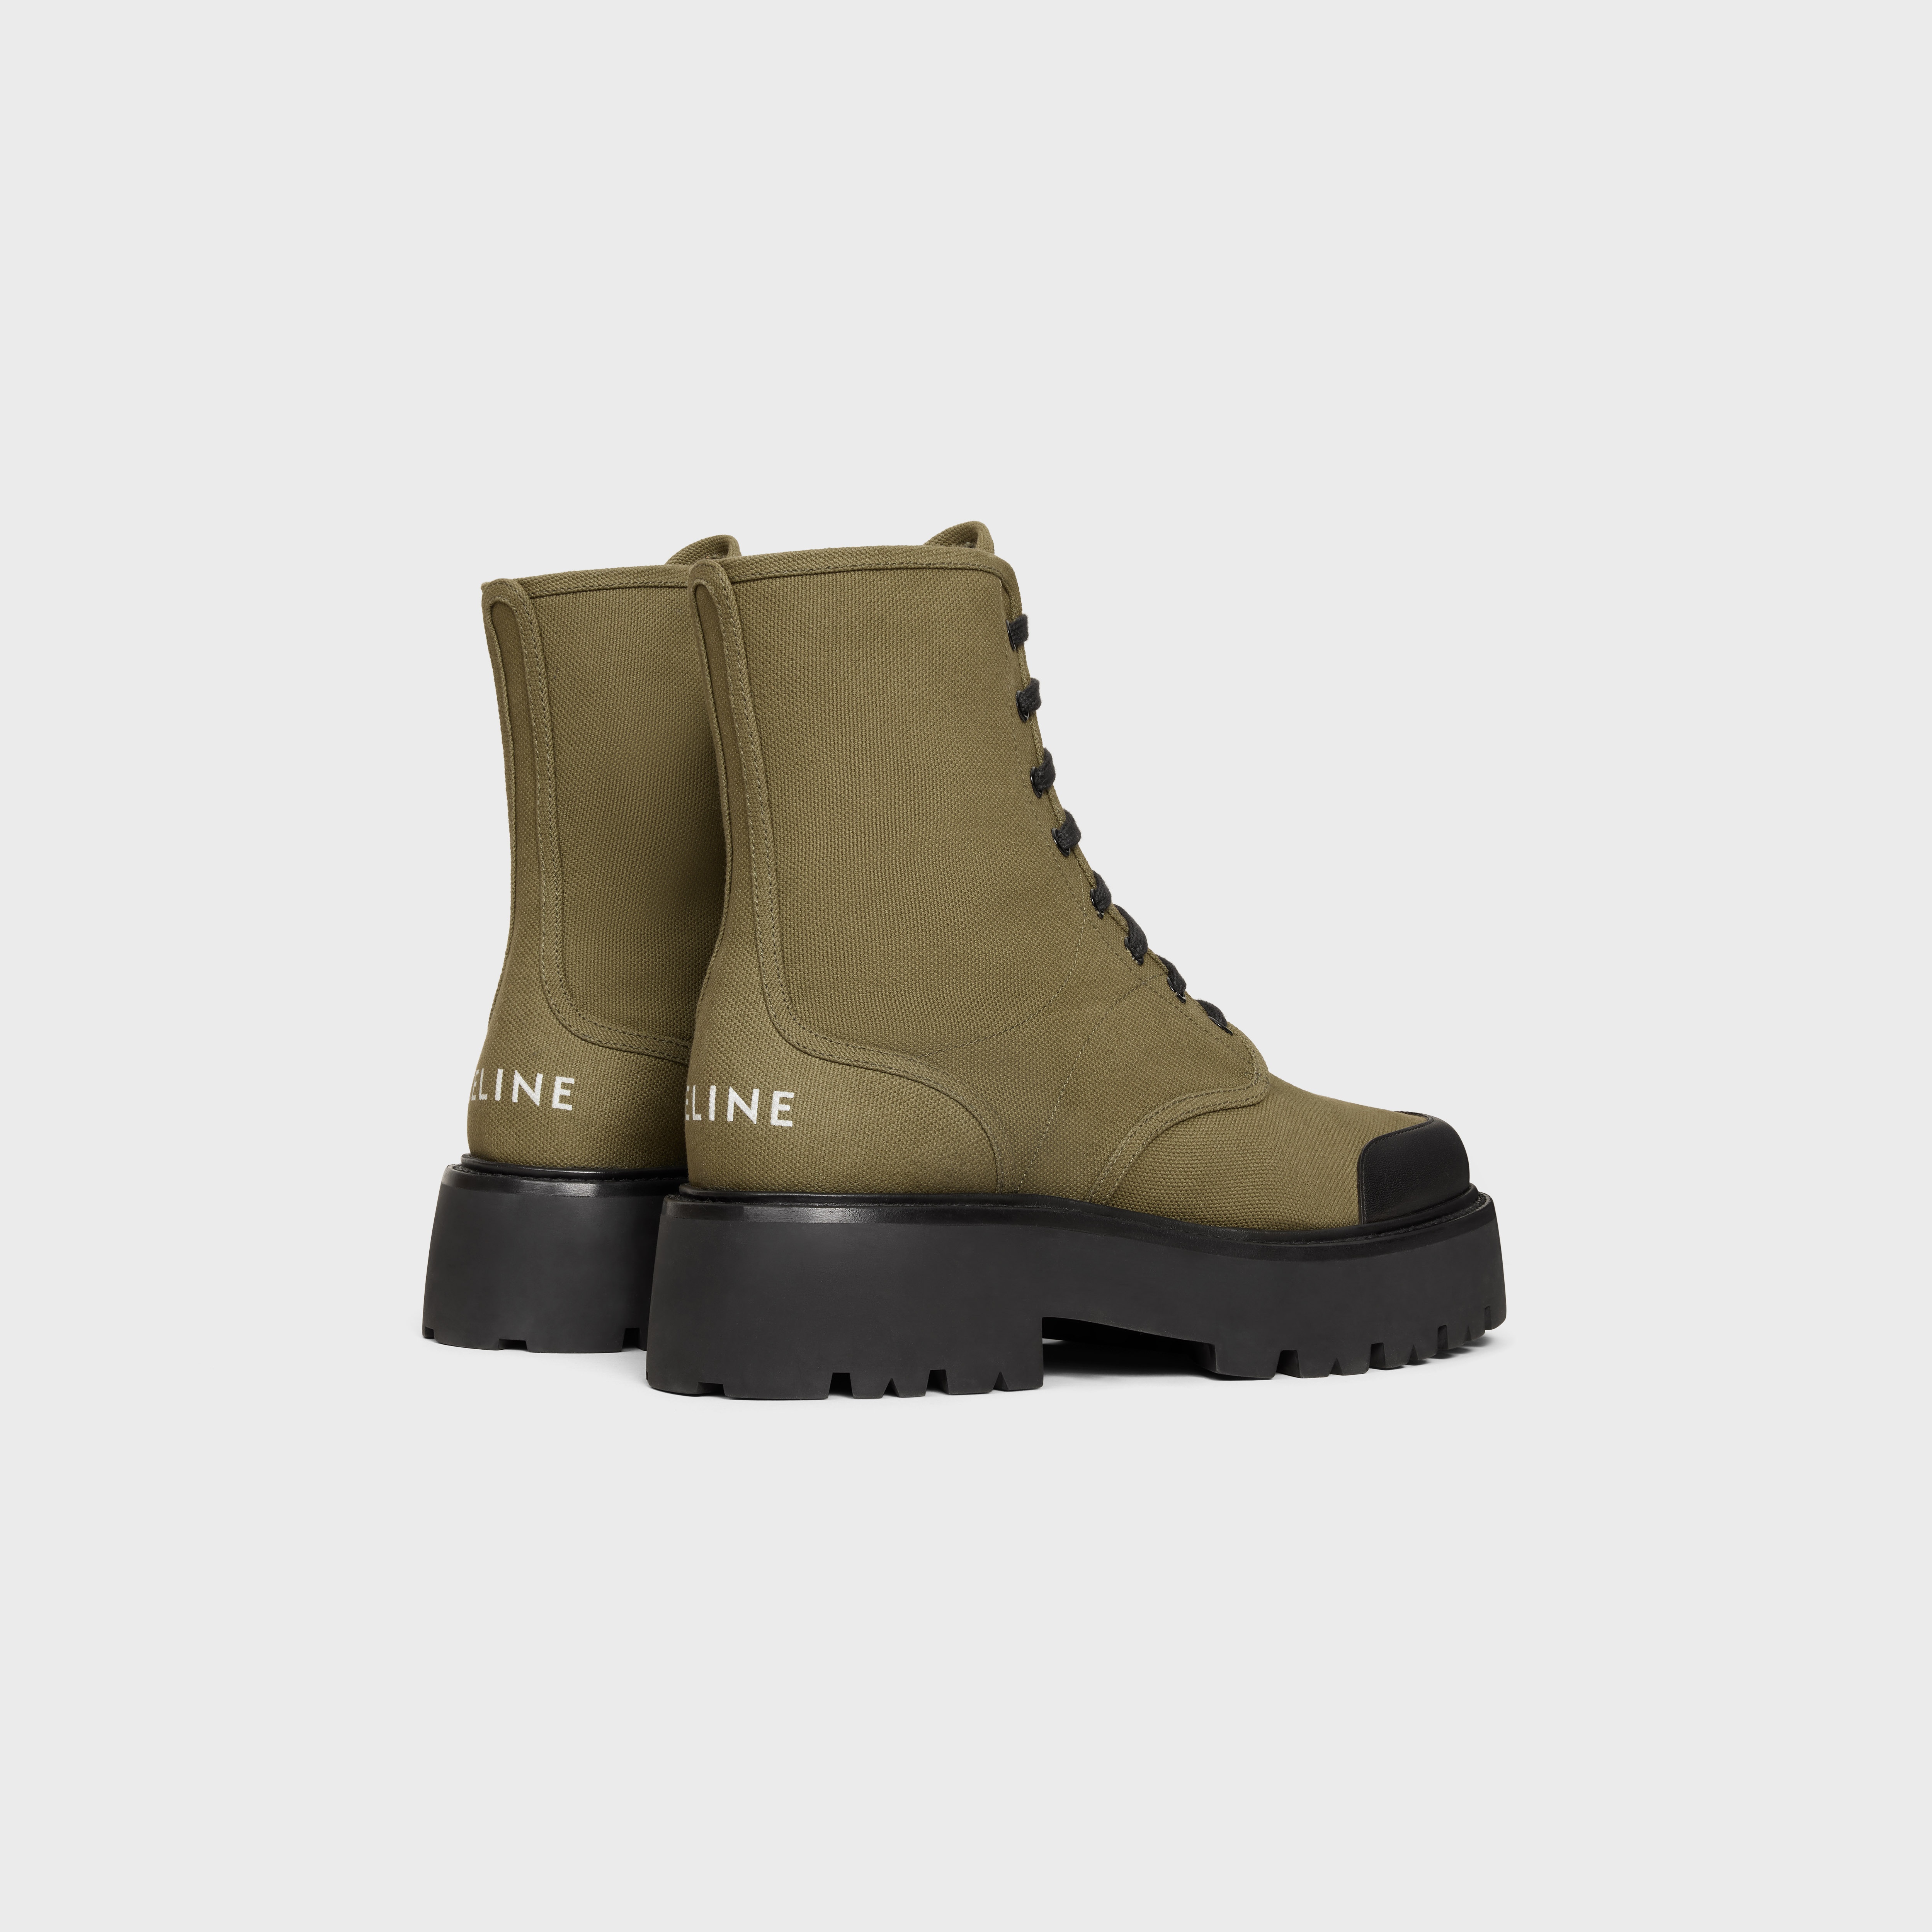 CELINE BULKY LACE-UP BOOTS in CANVAS AND SHINY BULLSKIN - 3